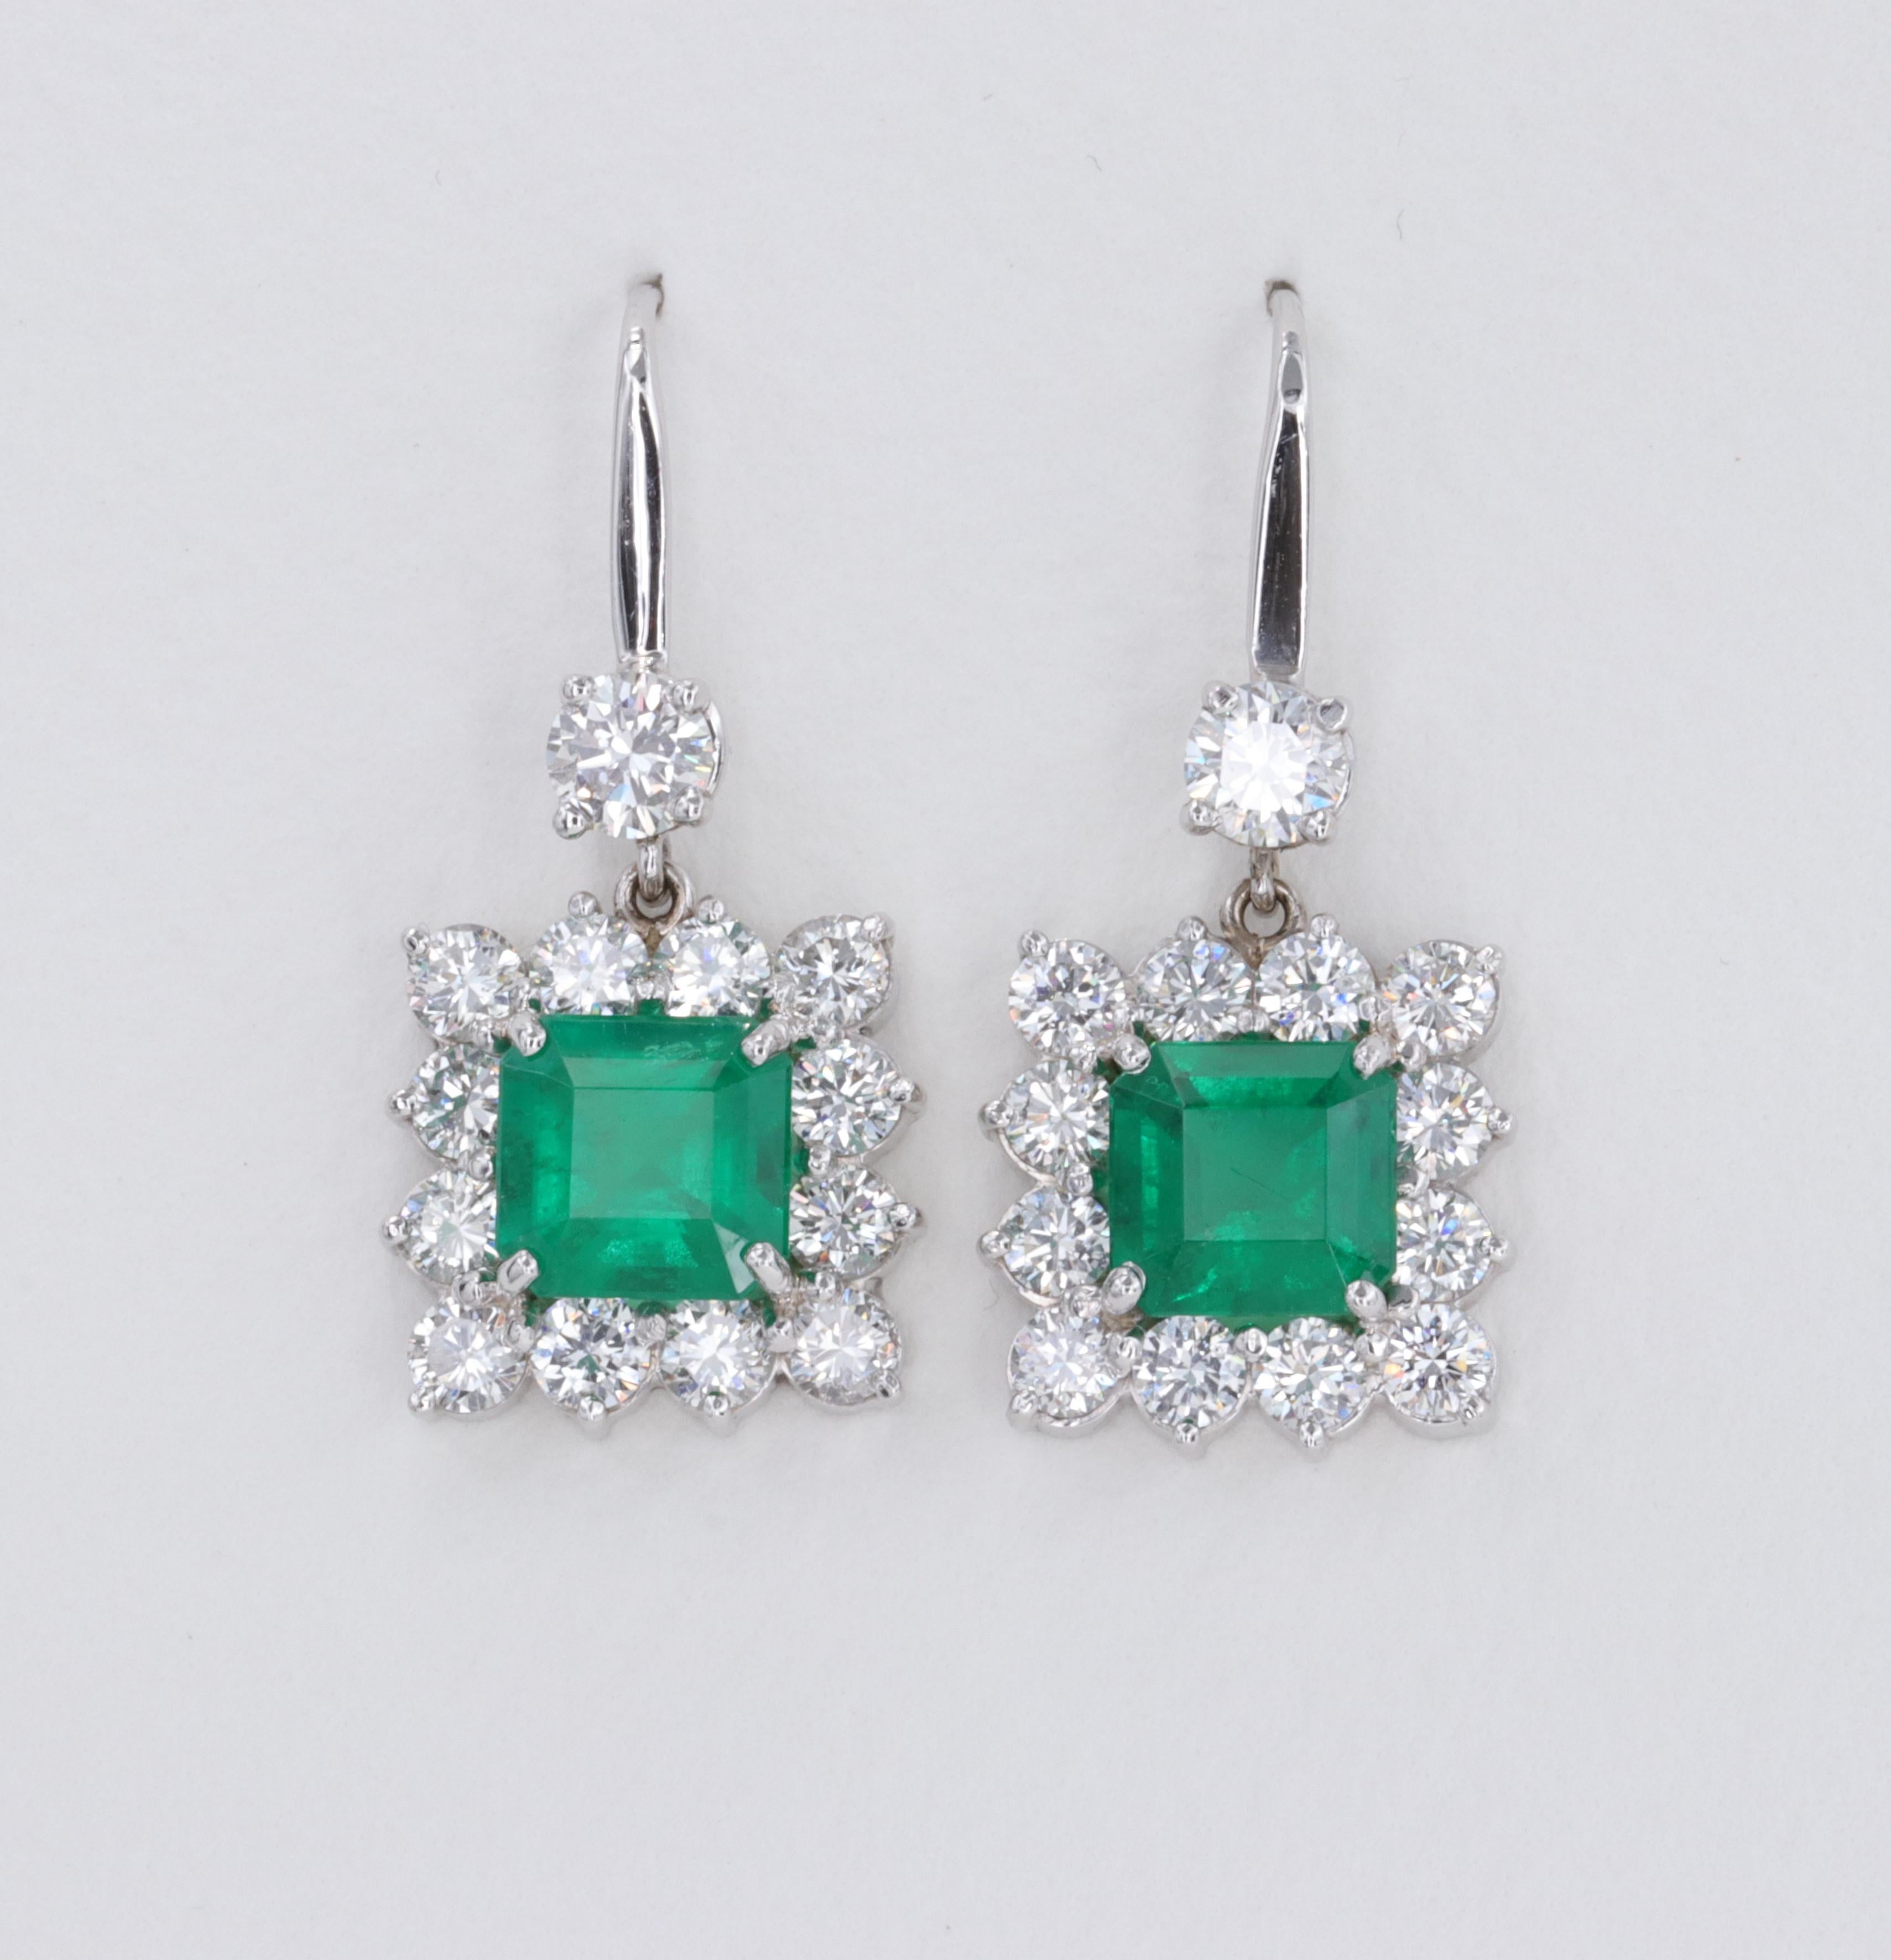 Exceptional Emerald and Diamond Halo Dangle Earrings Set in 18 Karat White Gold 

Emeralds:

Shape - Square Emerald Cut 
Weight - 2 Stones = 3.56 carats
Color - Vivid Green 
Clarity - Eye Clean

Diamonds:

Shape - Round Brilliant Cut 
Weight - 26